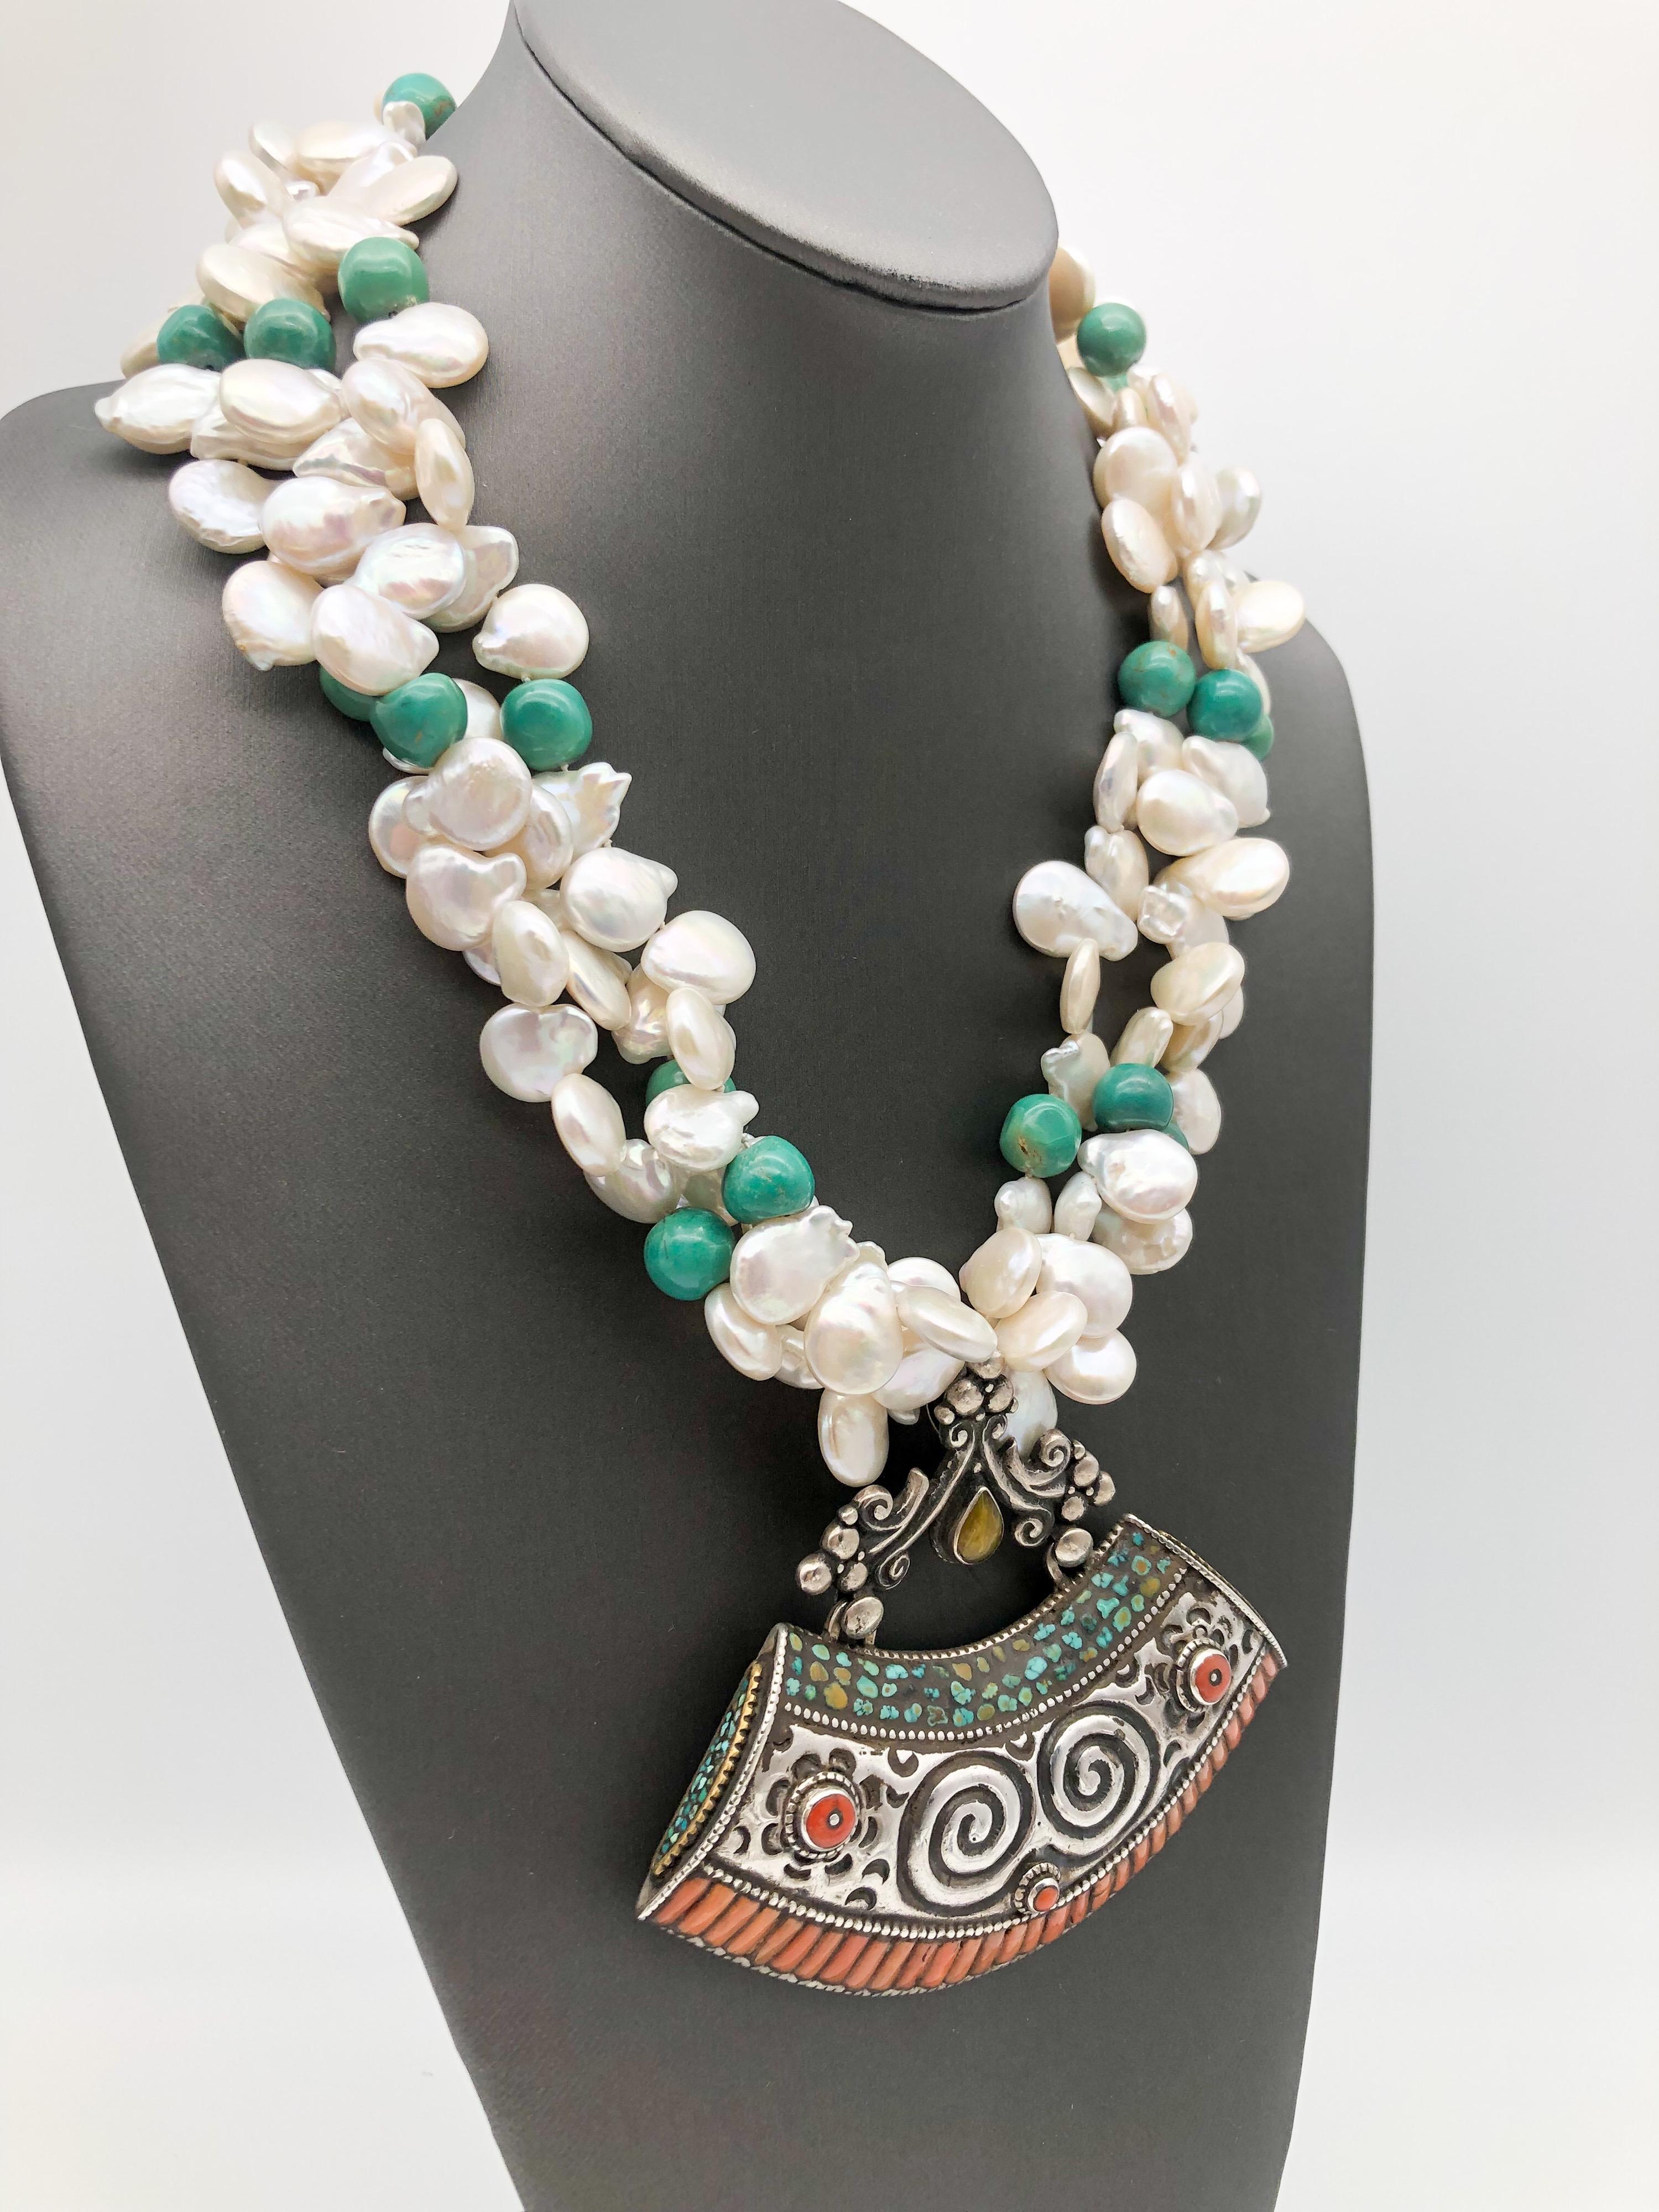 One-of-a-Kind
3 Strand Freshwater Pearl necklace spaced with 12mm Turquoise beads. This fabulous Tibetan Pendant was hand-made from Sterling Silver and decorated with Turquoise and Tibetan mosaic, the craftmanship in the back is especially